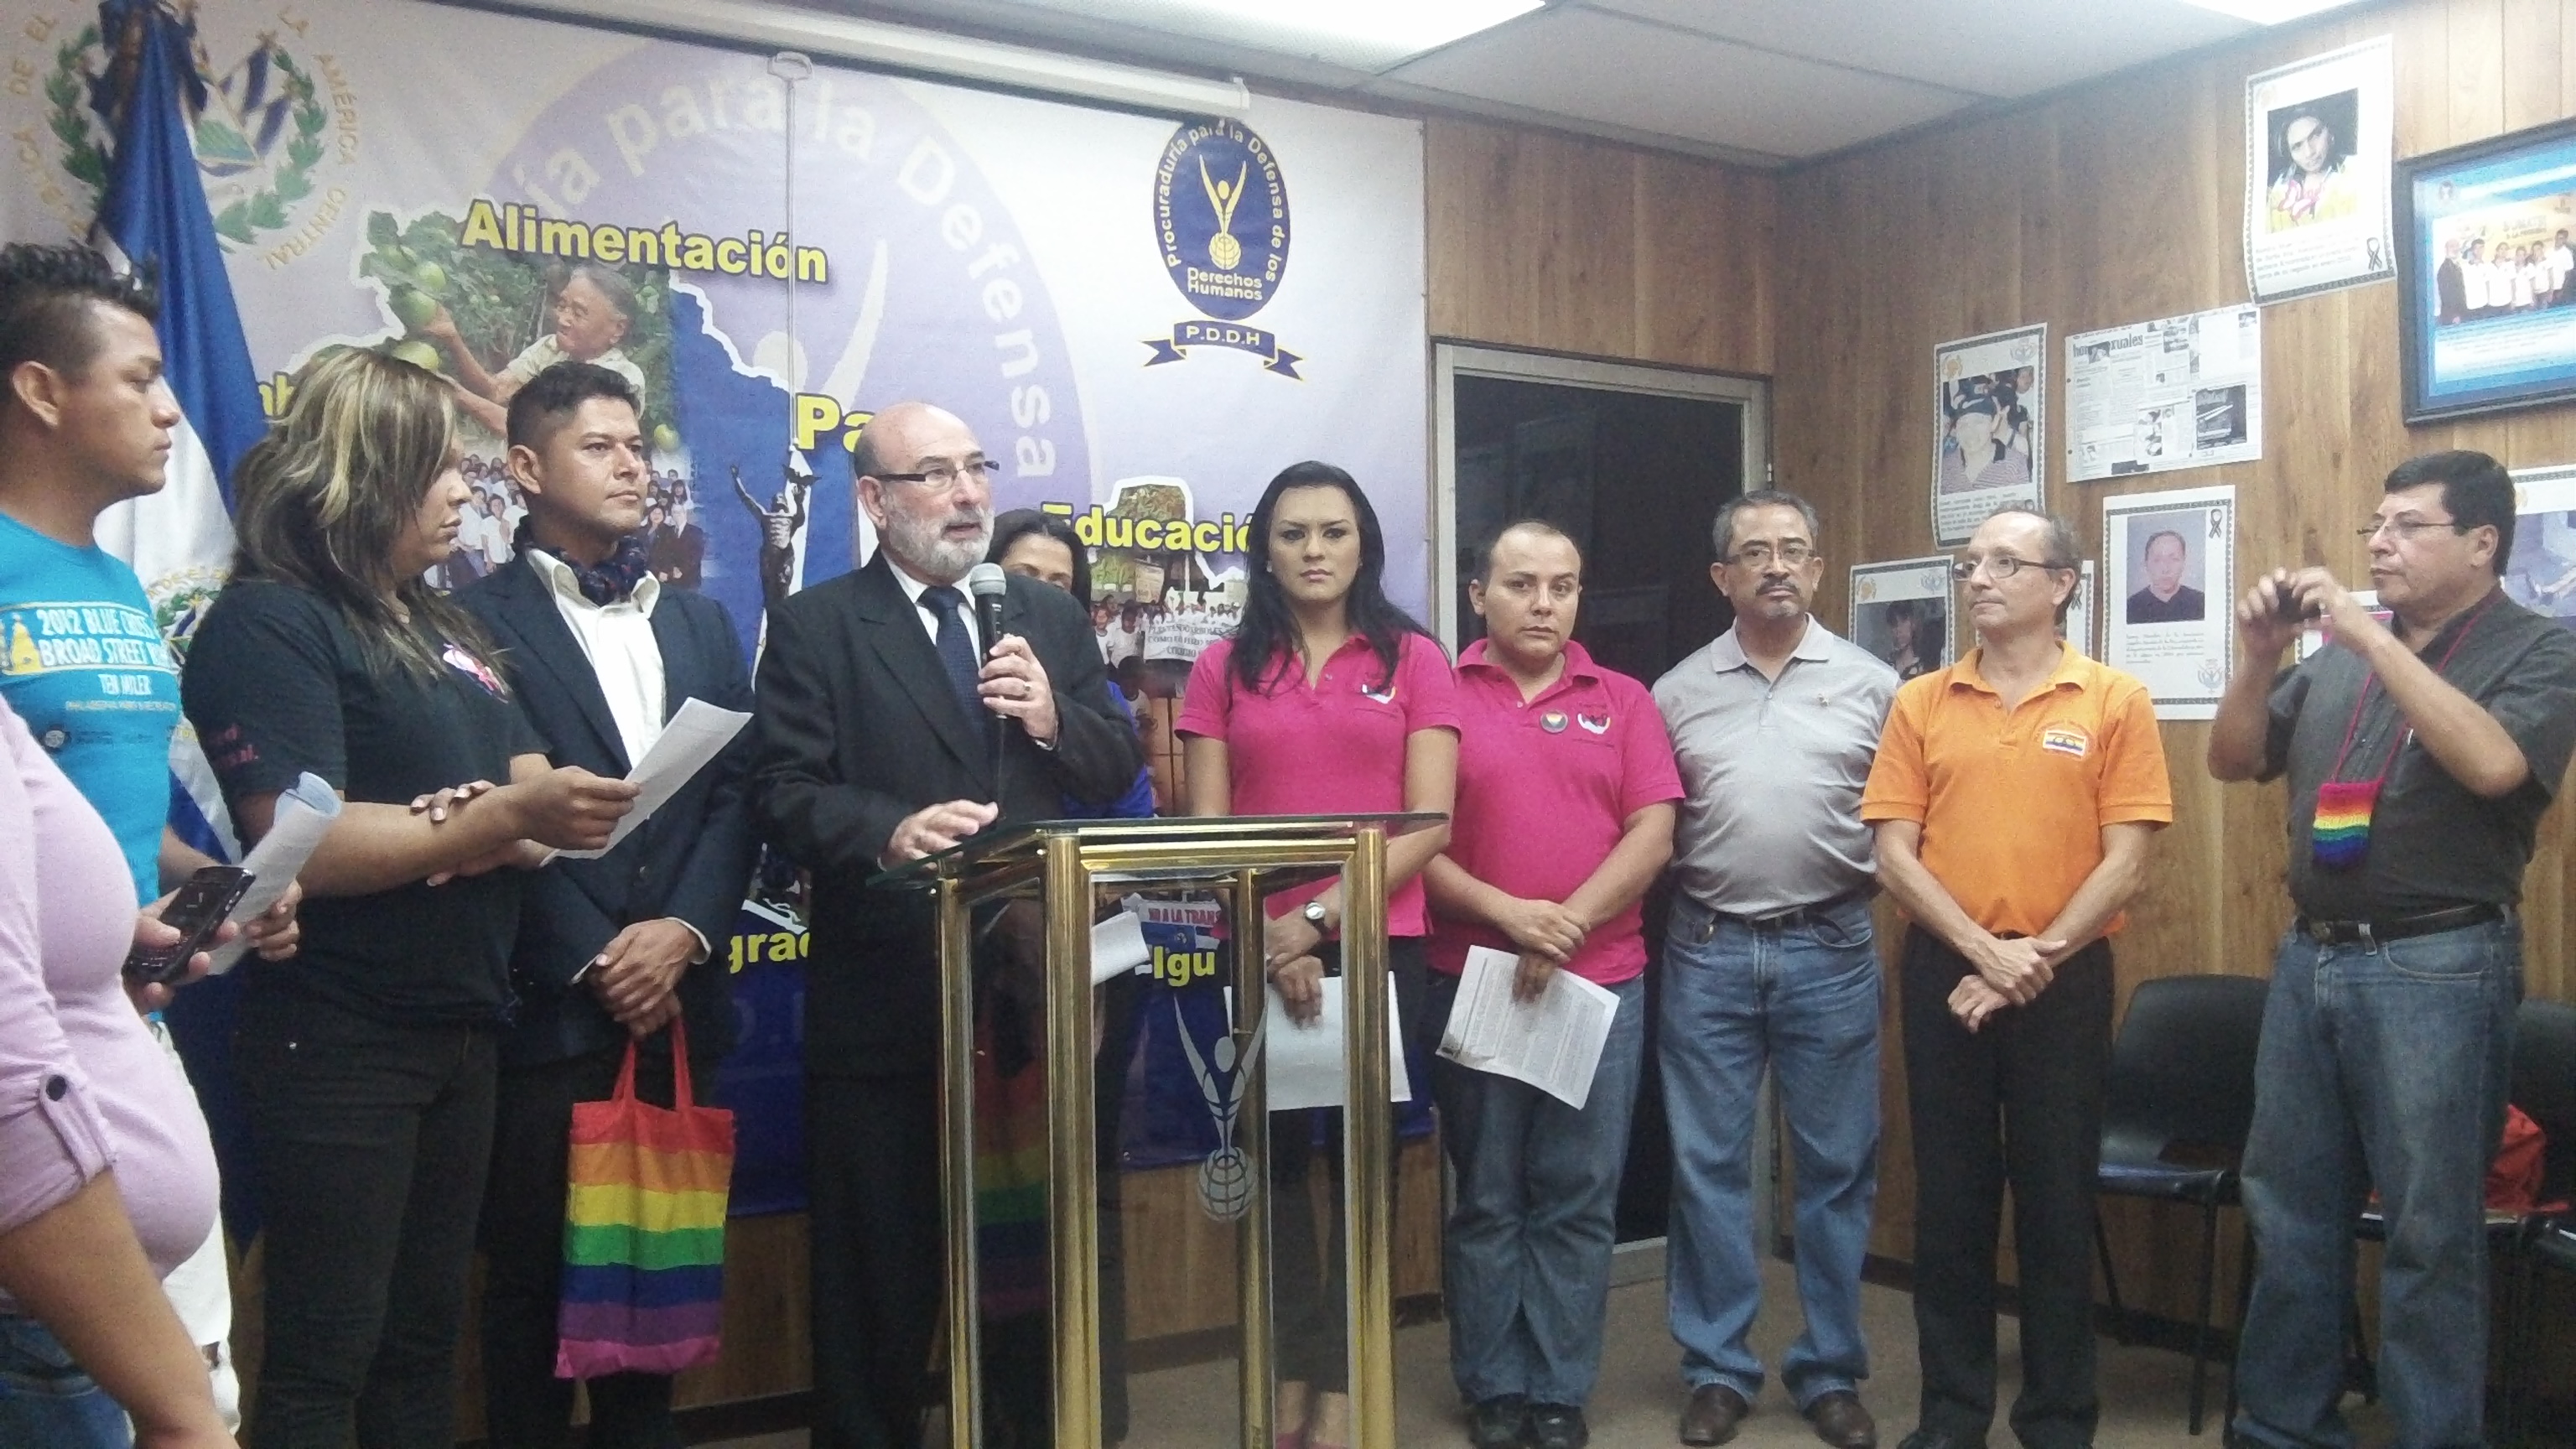 Former Human Rights Ombudsman Oscar Luna and sexual diversity activists give a press conference about impunity in assassinations of LGBTQ individuals on May 17, 2013. Photo source: Danielle Marie Mackey